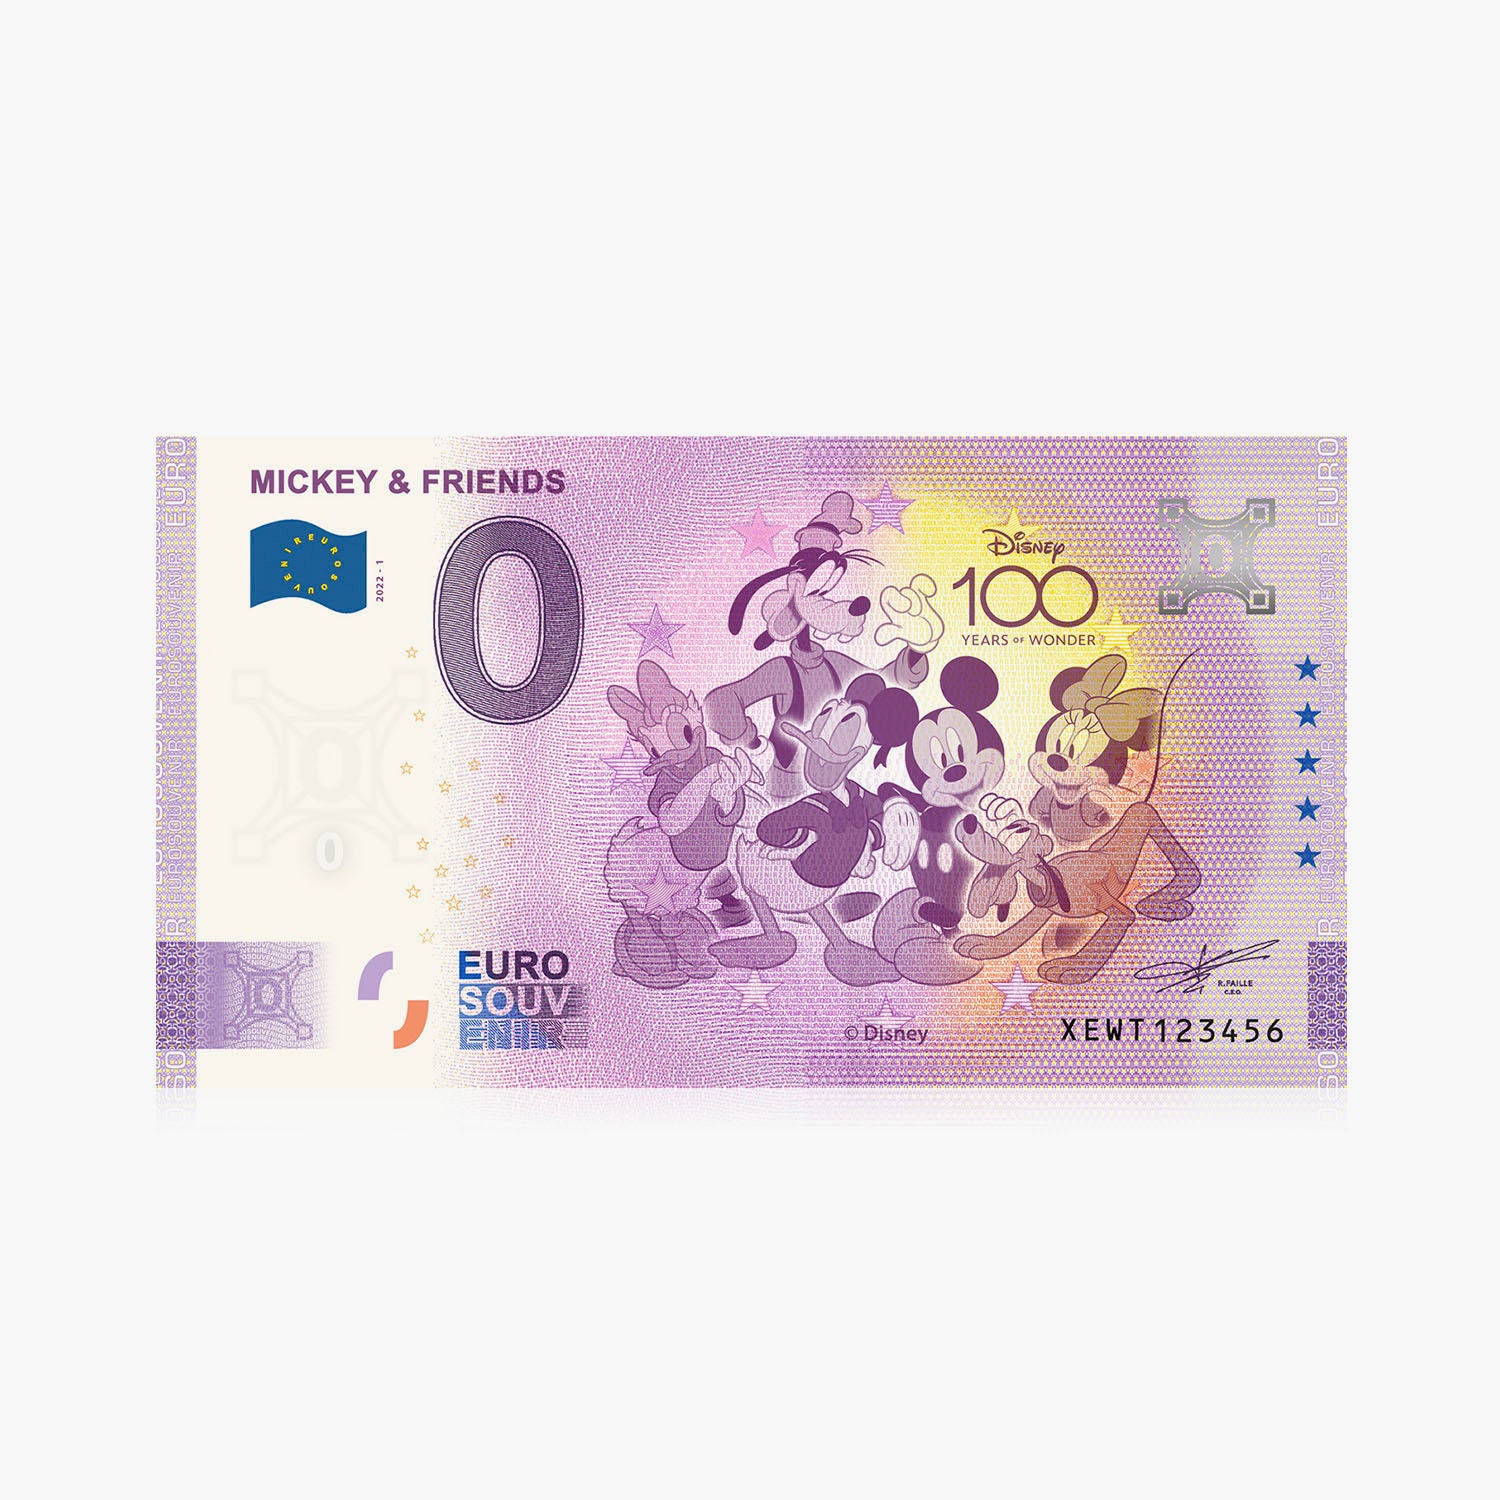 The Disney 100th Anniversary 0 Euro Banknote Mickey and Friends